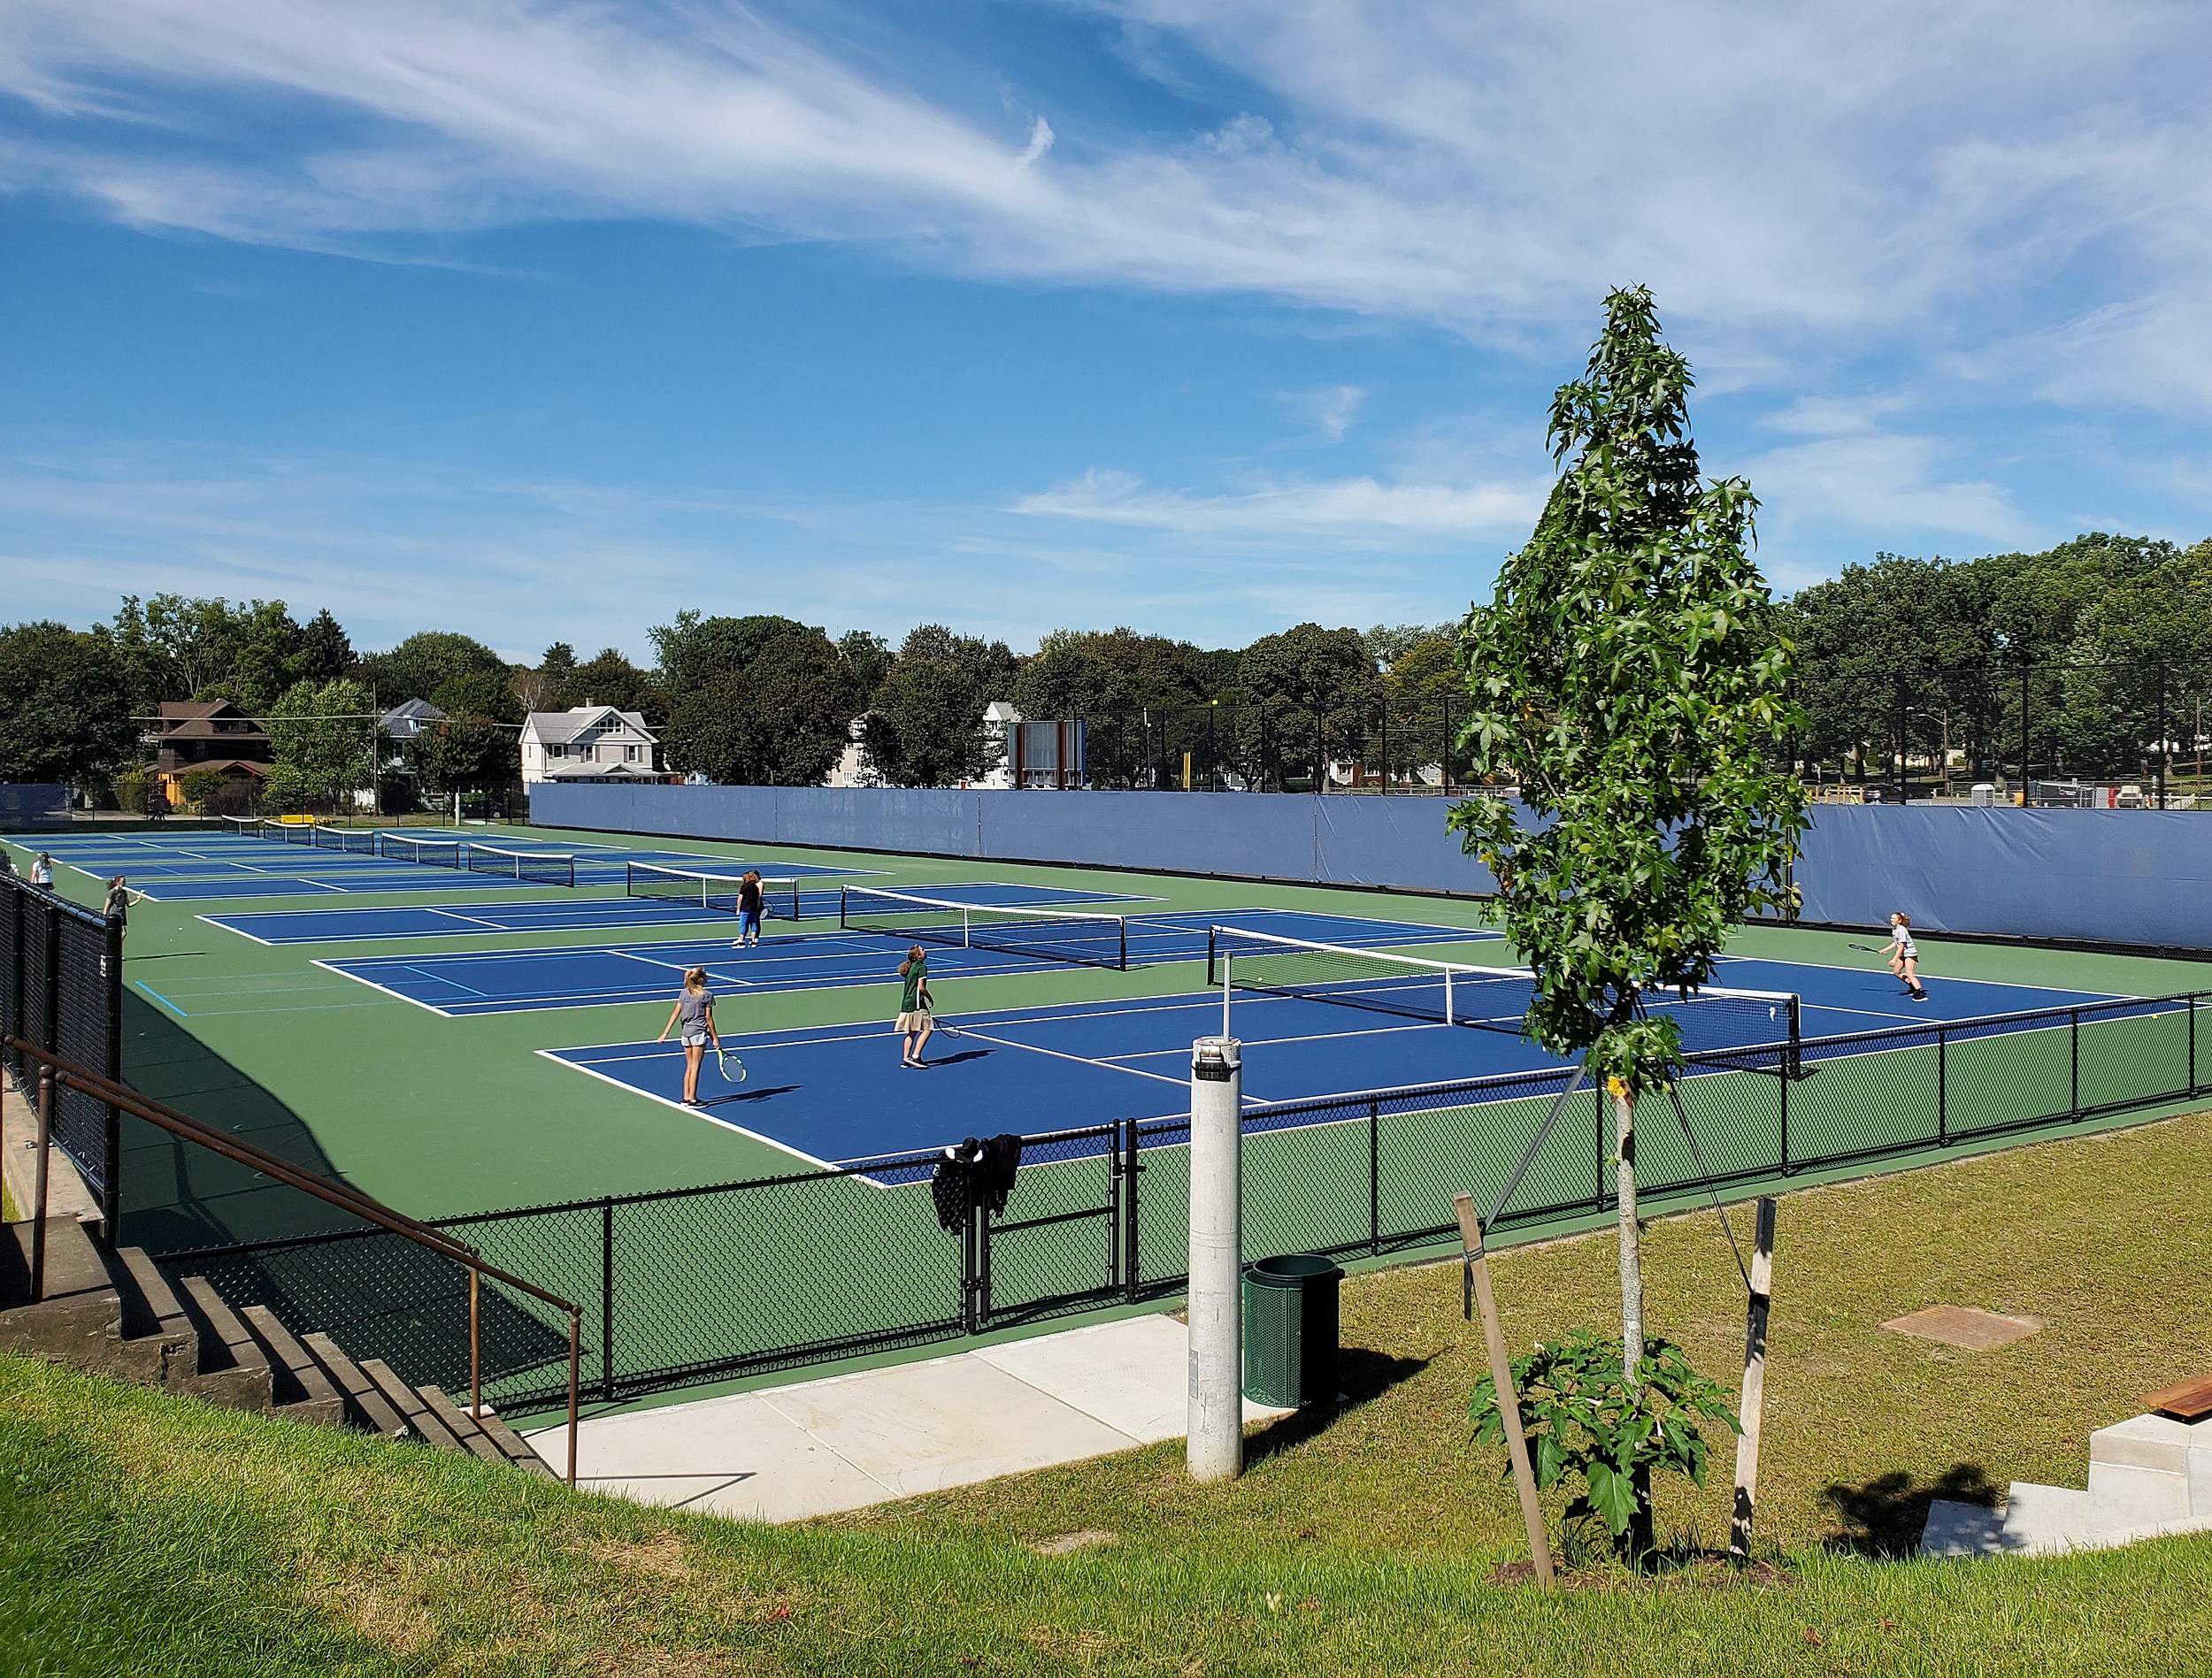 Drainage Problems Must Be Fixed at New Rec Park Tennis Courts